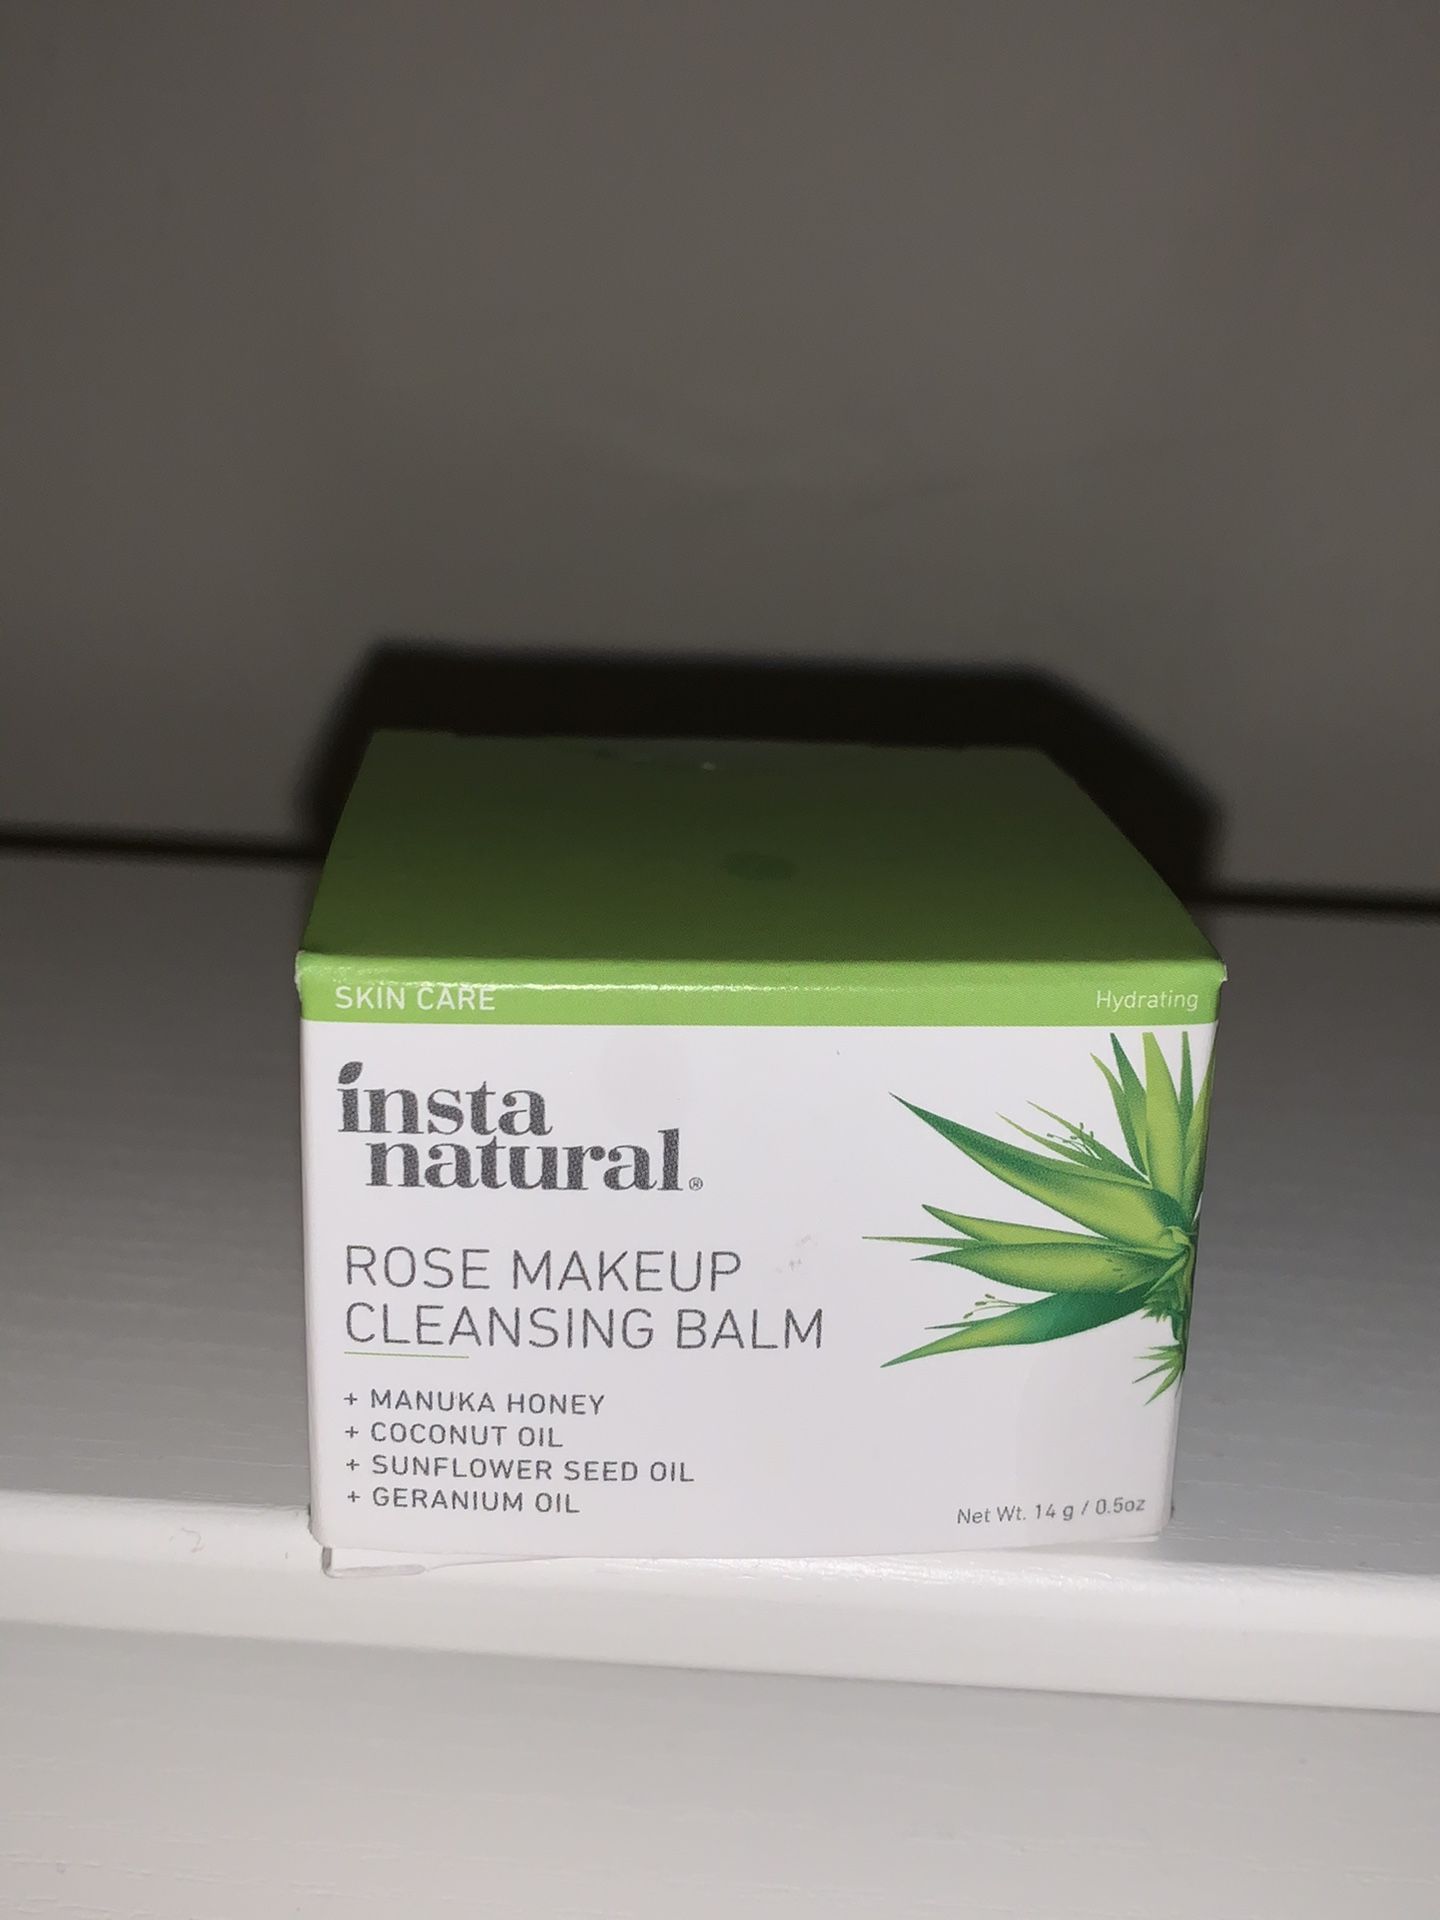 New insta natural rose Makeup Cleaning Balm